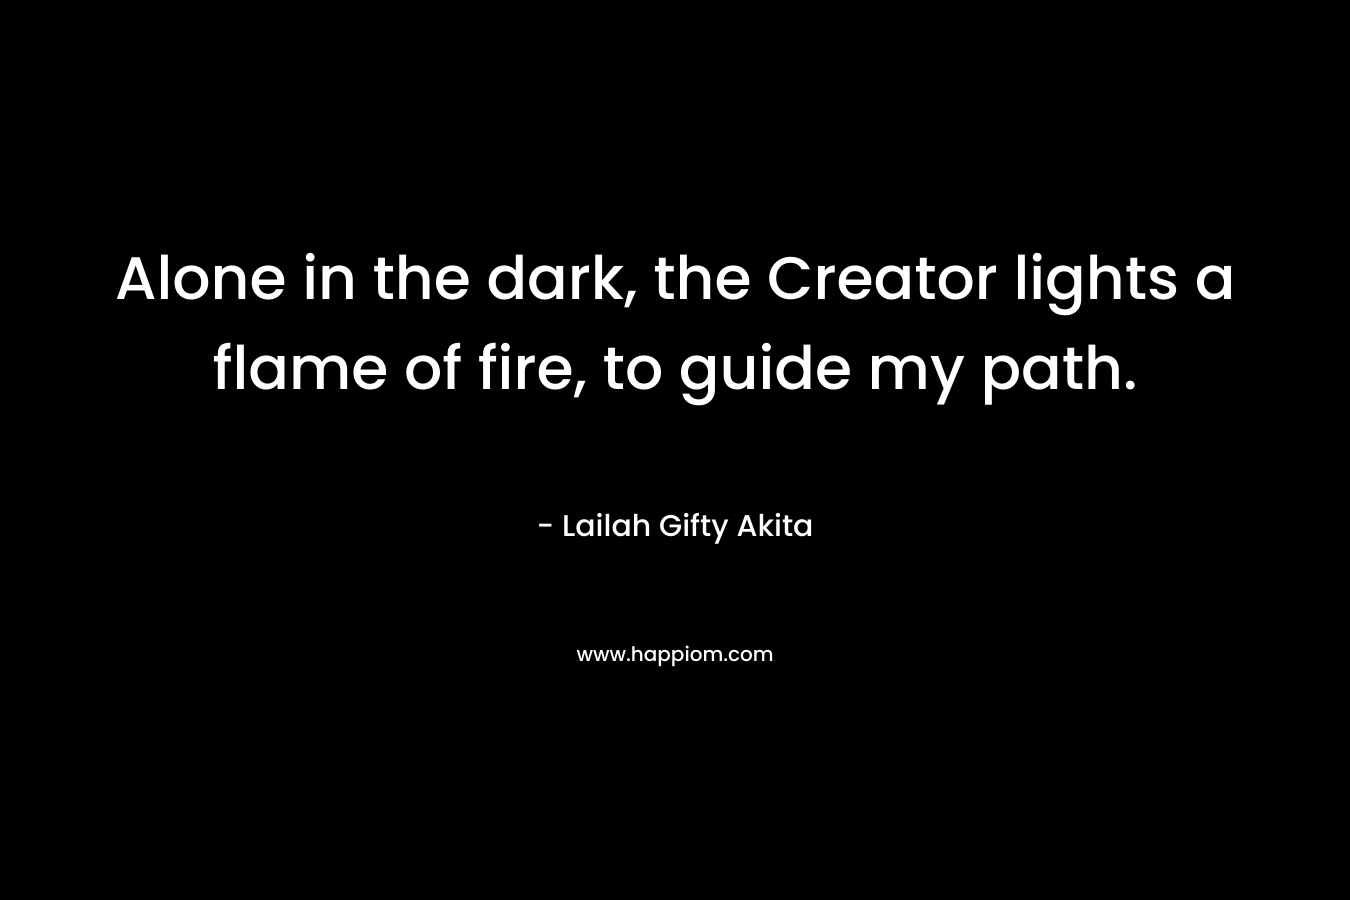 Alone in the dark, the Creator lights a flame of fire, to guide my path.